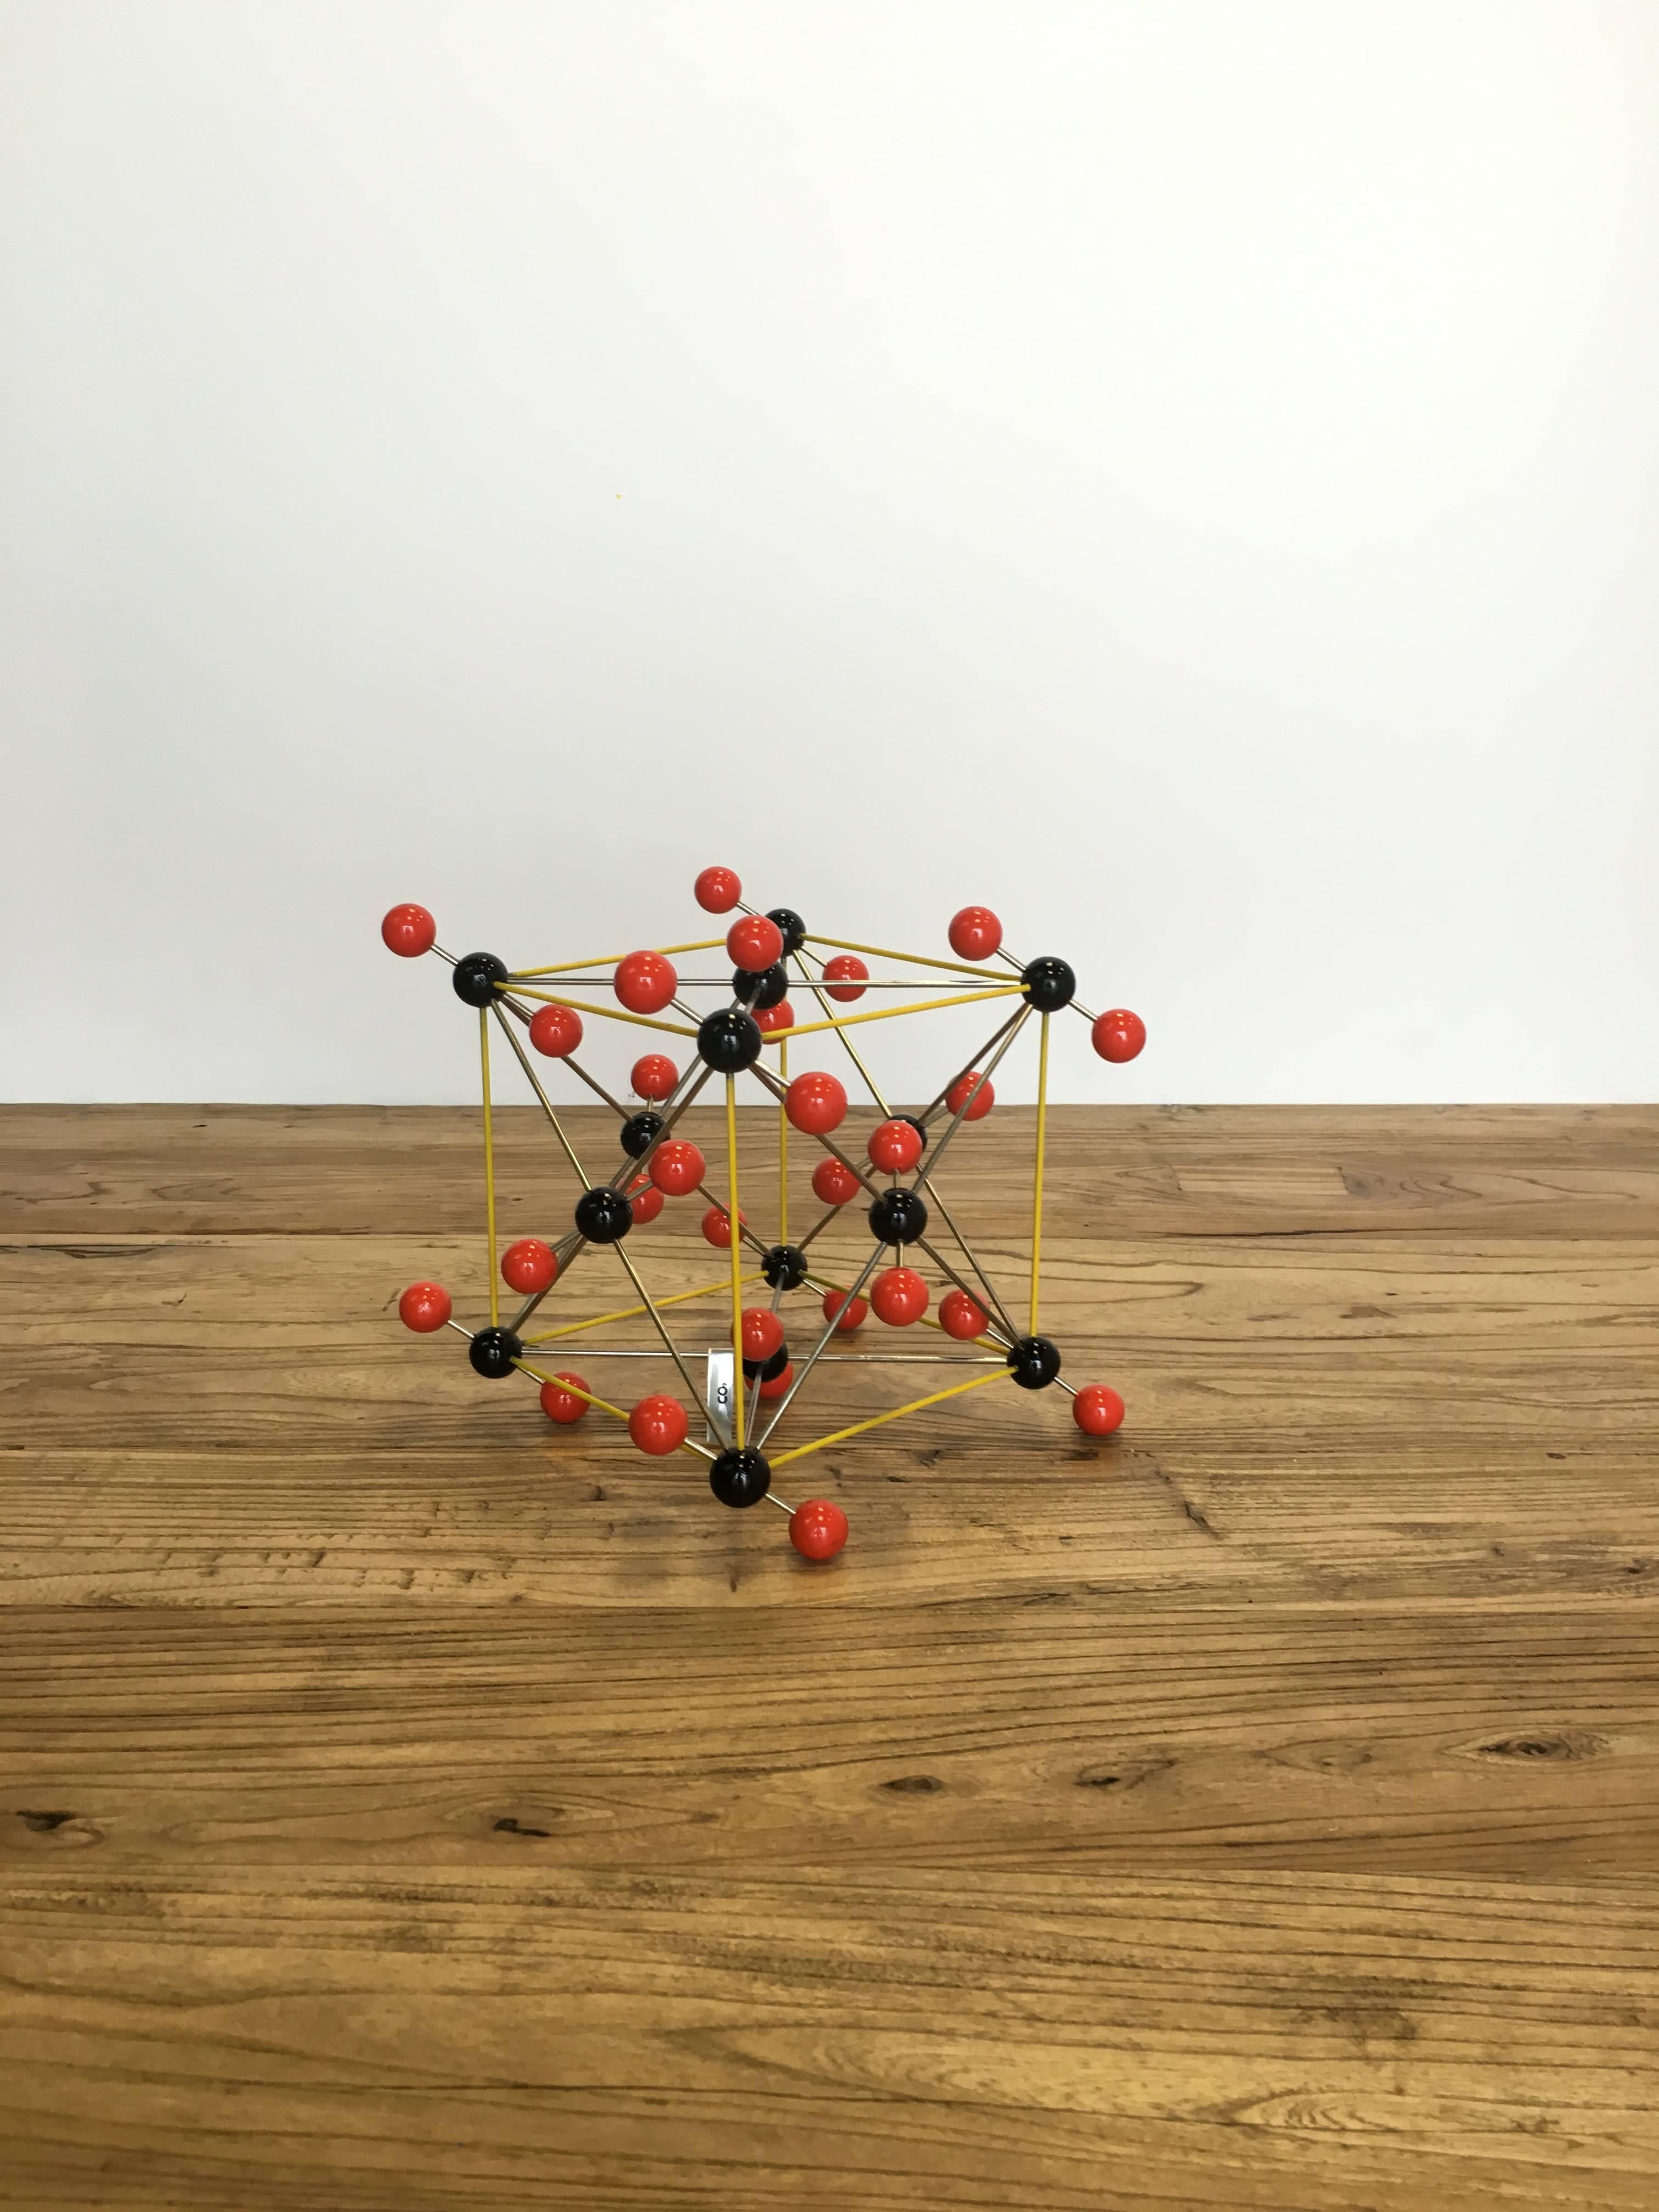 carbon dioxide ball and stick model